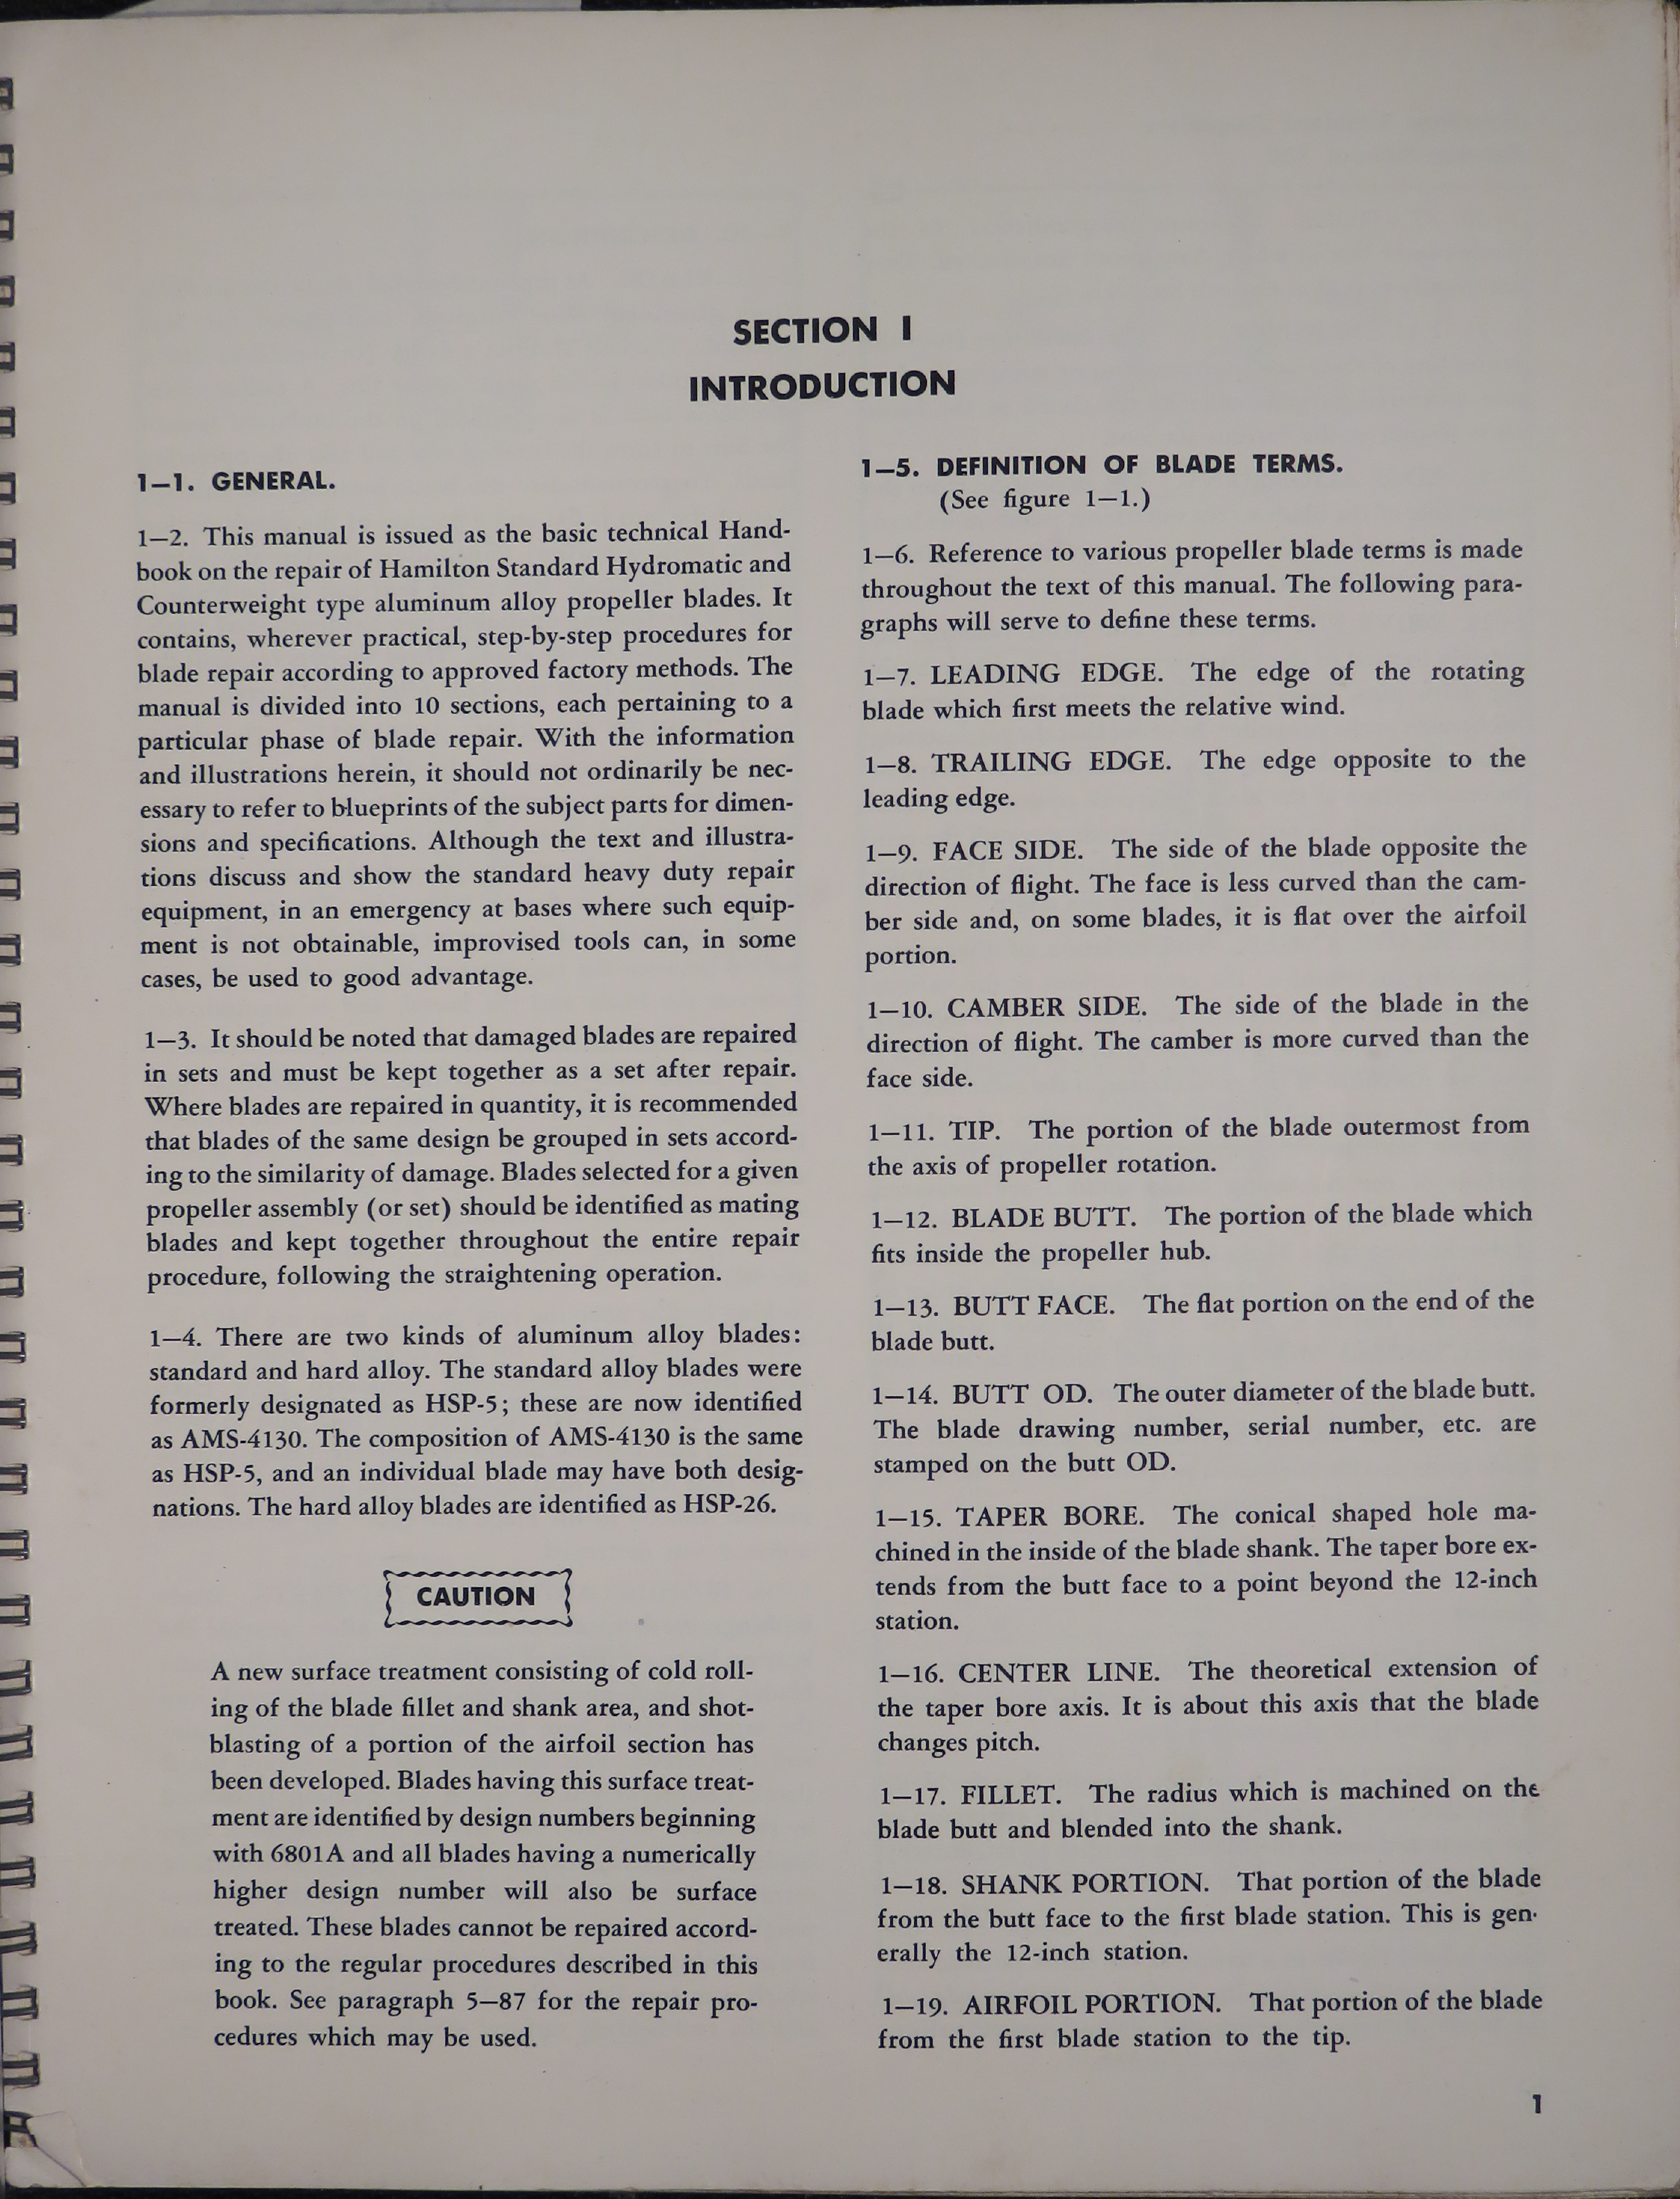 Sample page 7 from AirCorps Library document: Hamilton Standard Blade Repair Manual